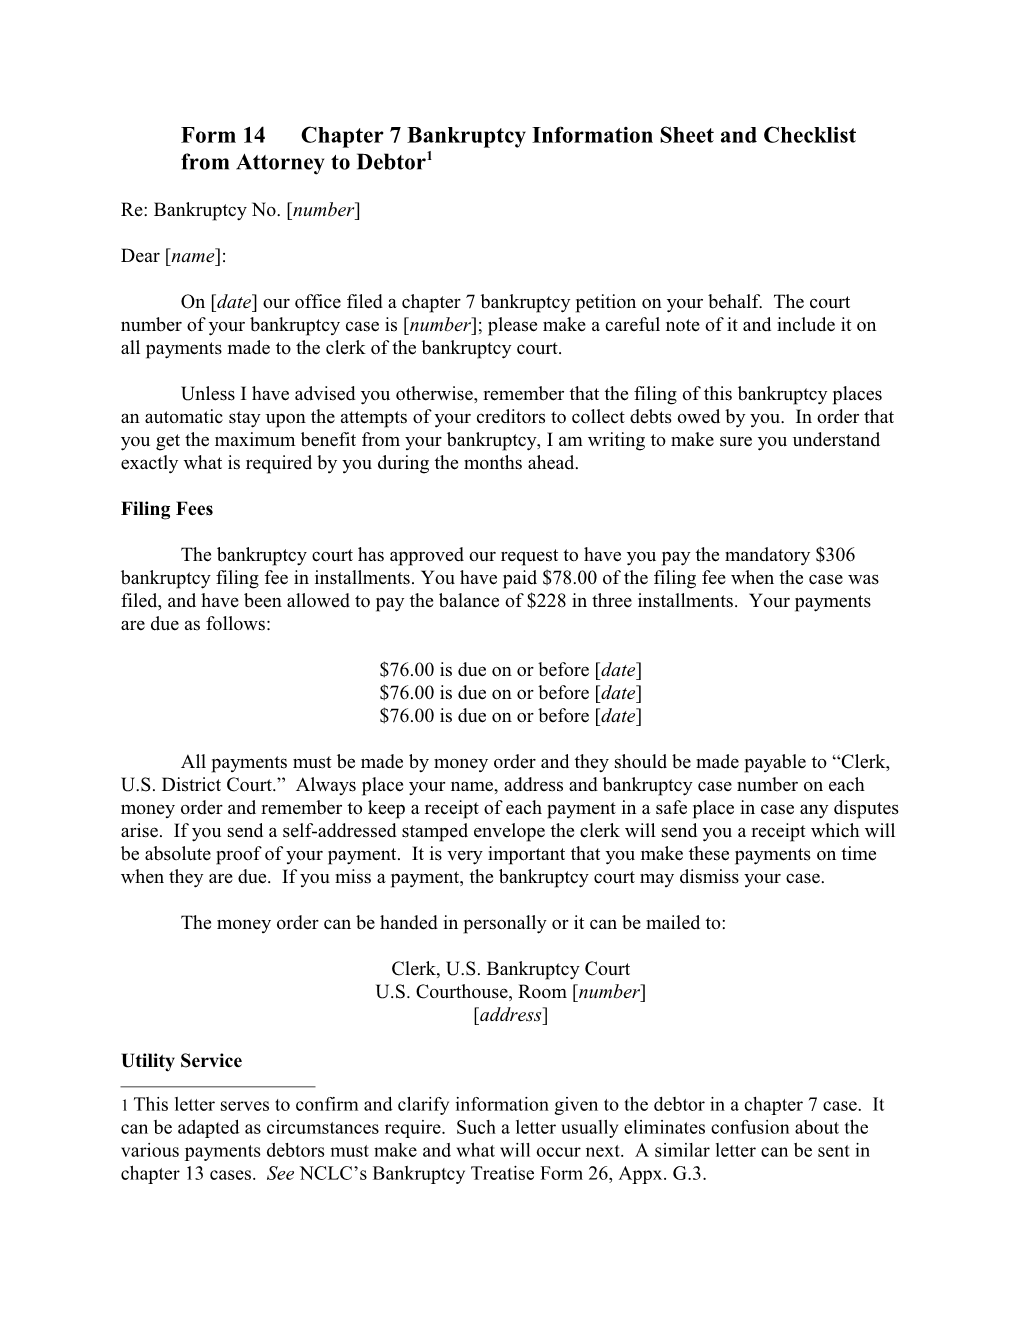 Form 14Chapter 7 Bankruptcy Information Sheet and Checklist from Attorney to Debtor 1